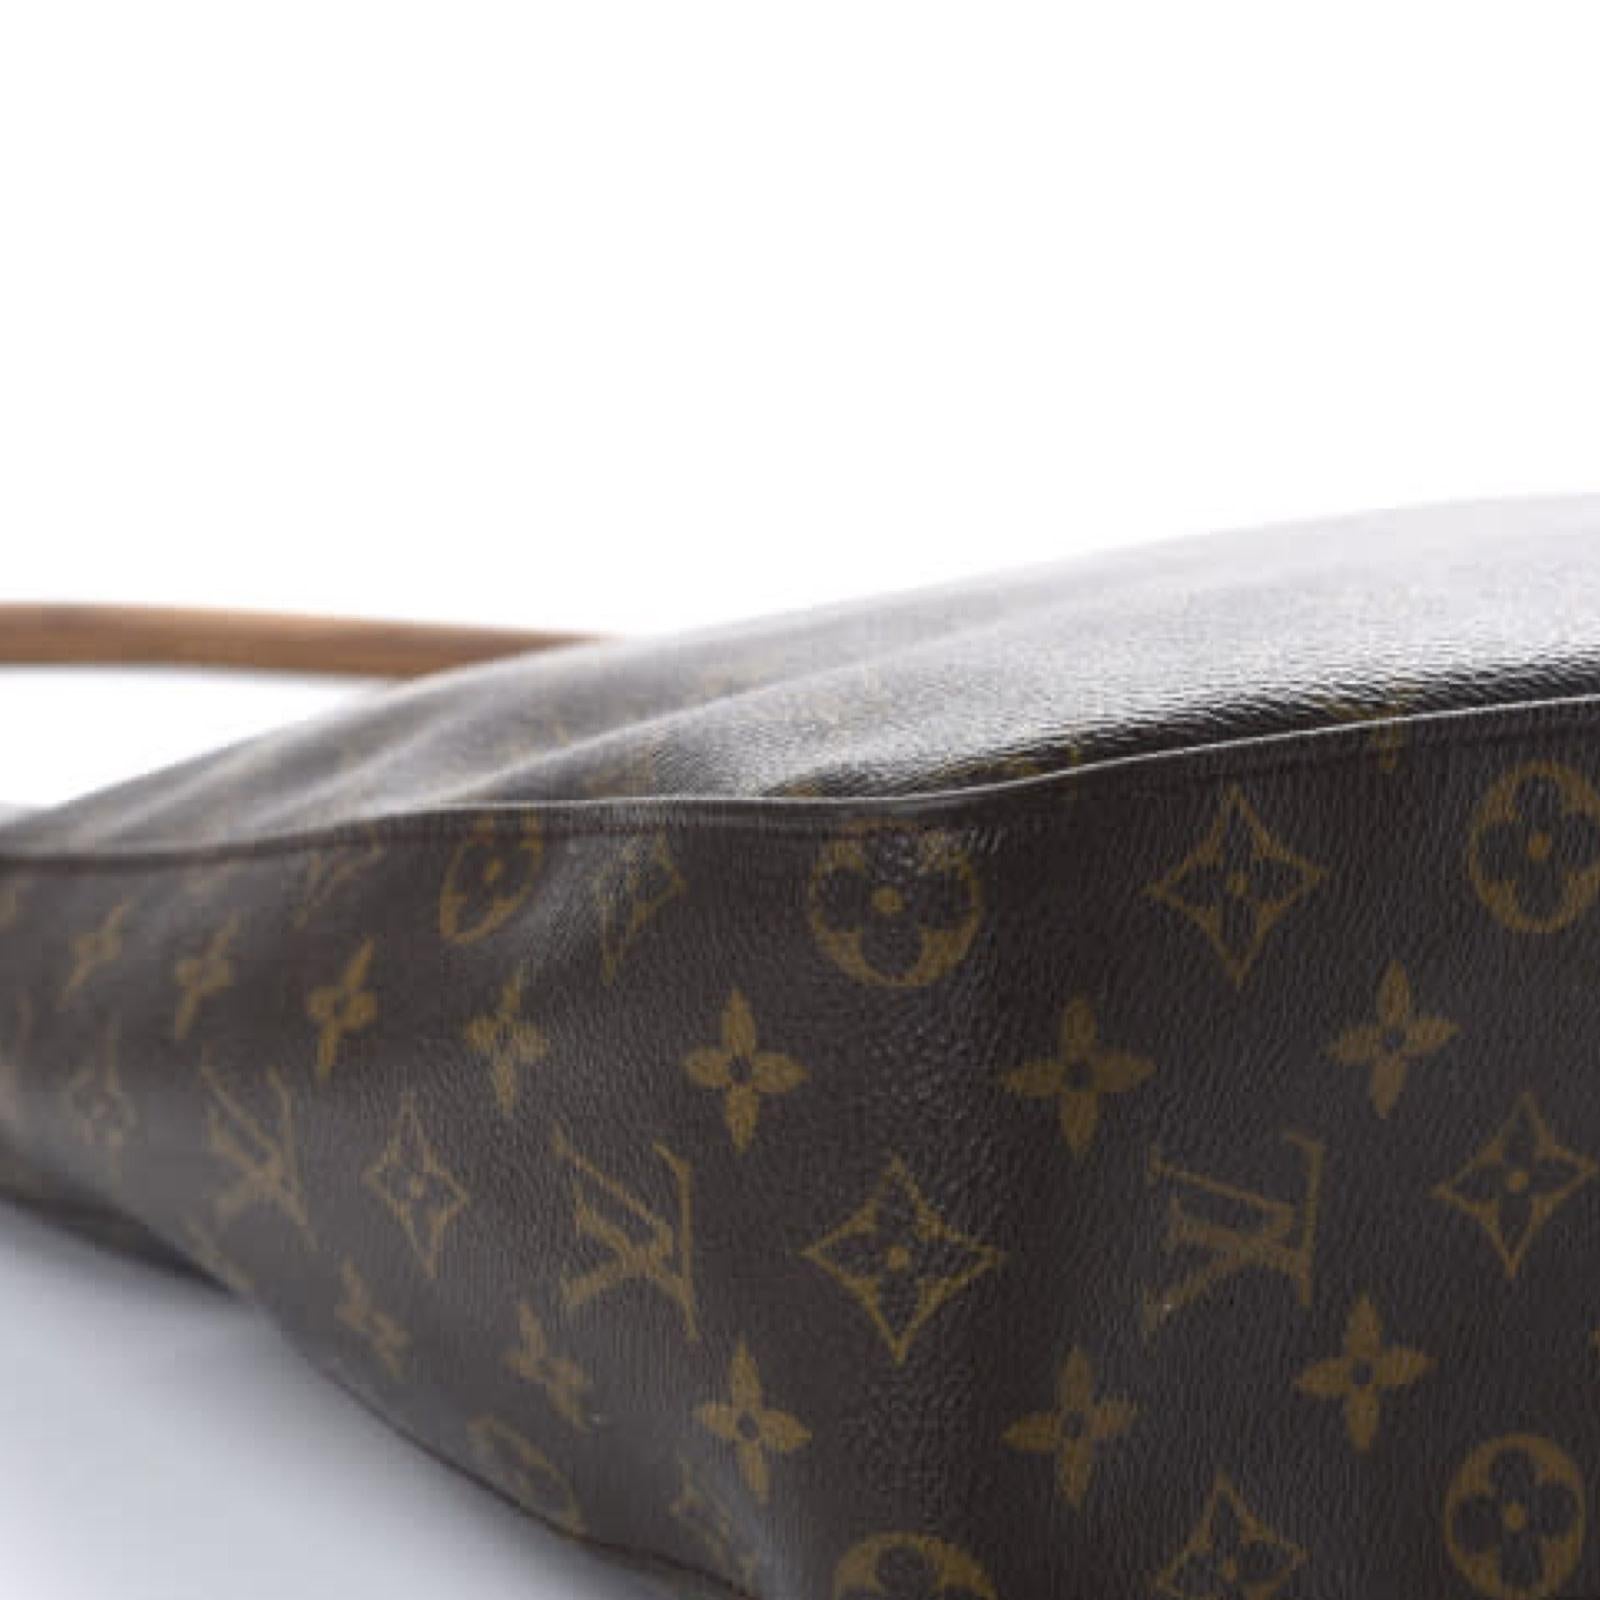 This stylish shoulder bag is crafted of signature Louis Vuitton monogram coated canvas. It features vachetta cowhide leather finishes.

COLOR: Brown
MATERIAL: Coated canvas
MEASURES: H 12.25” x L 12” x D 4”
DROP: 10”
EST. RETAIL: $2000
CONDITION: